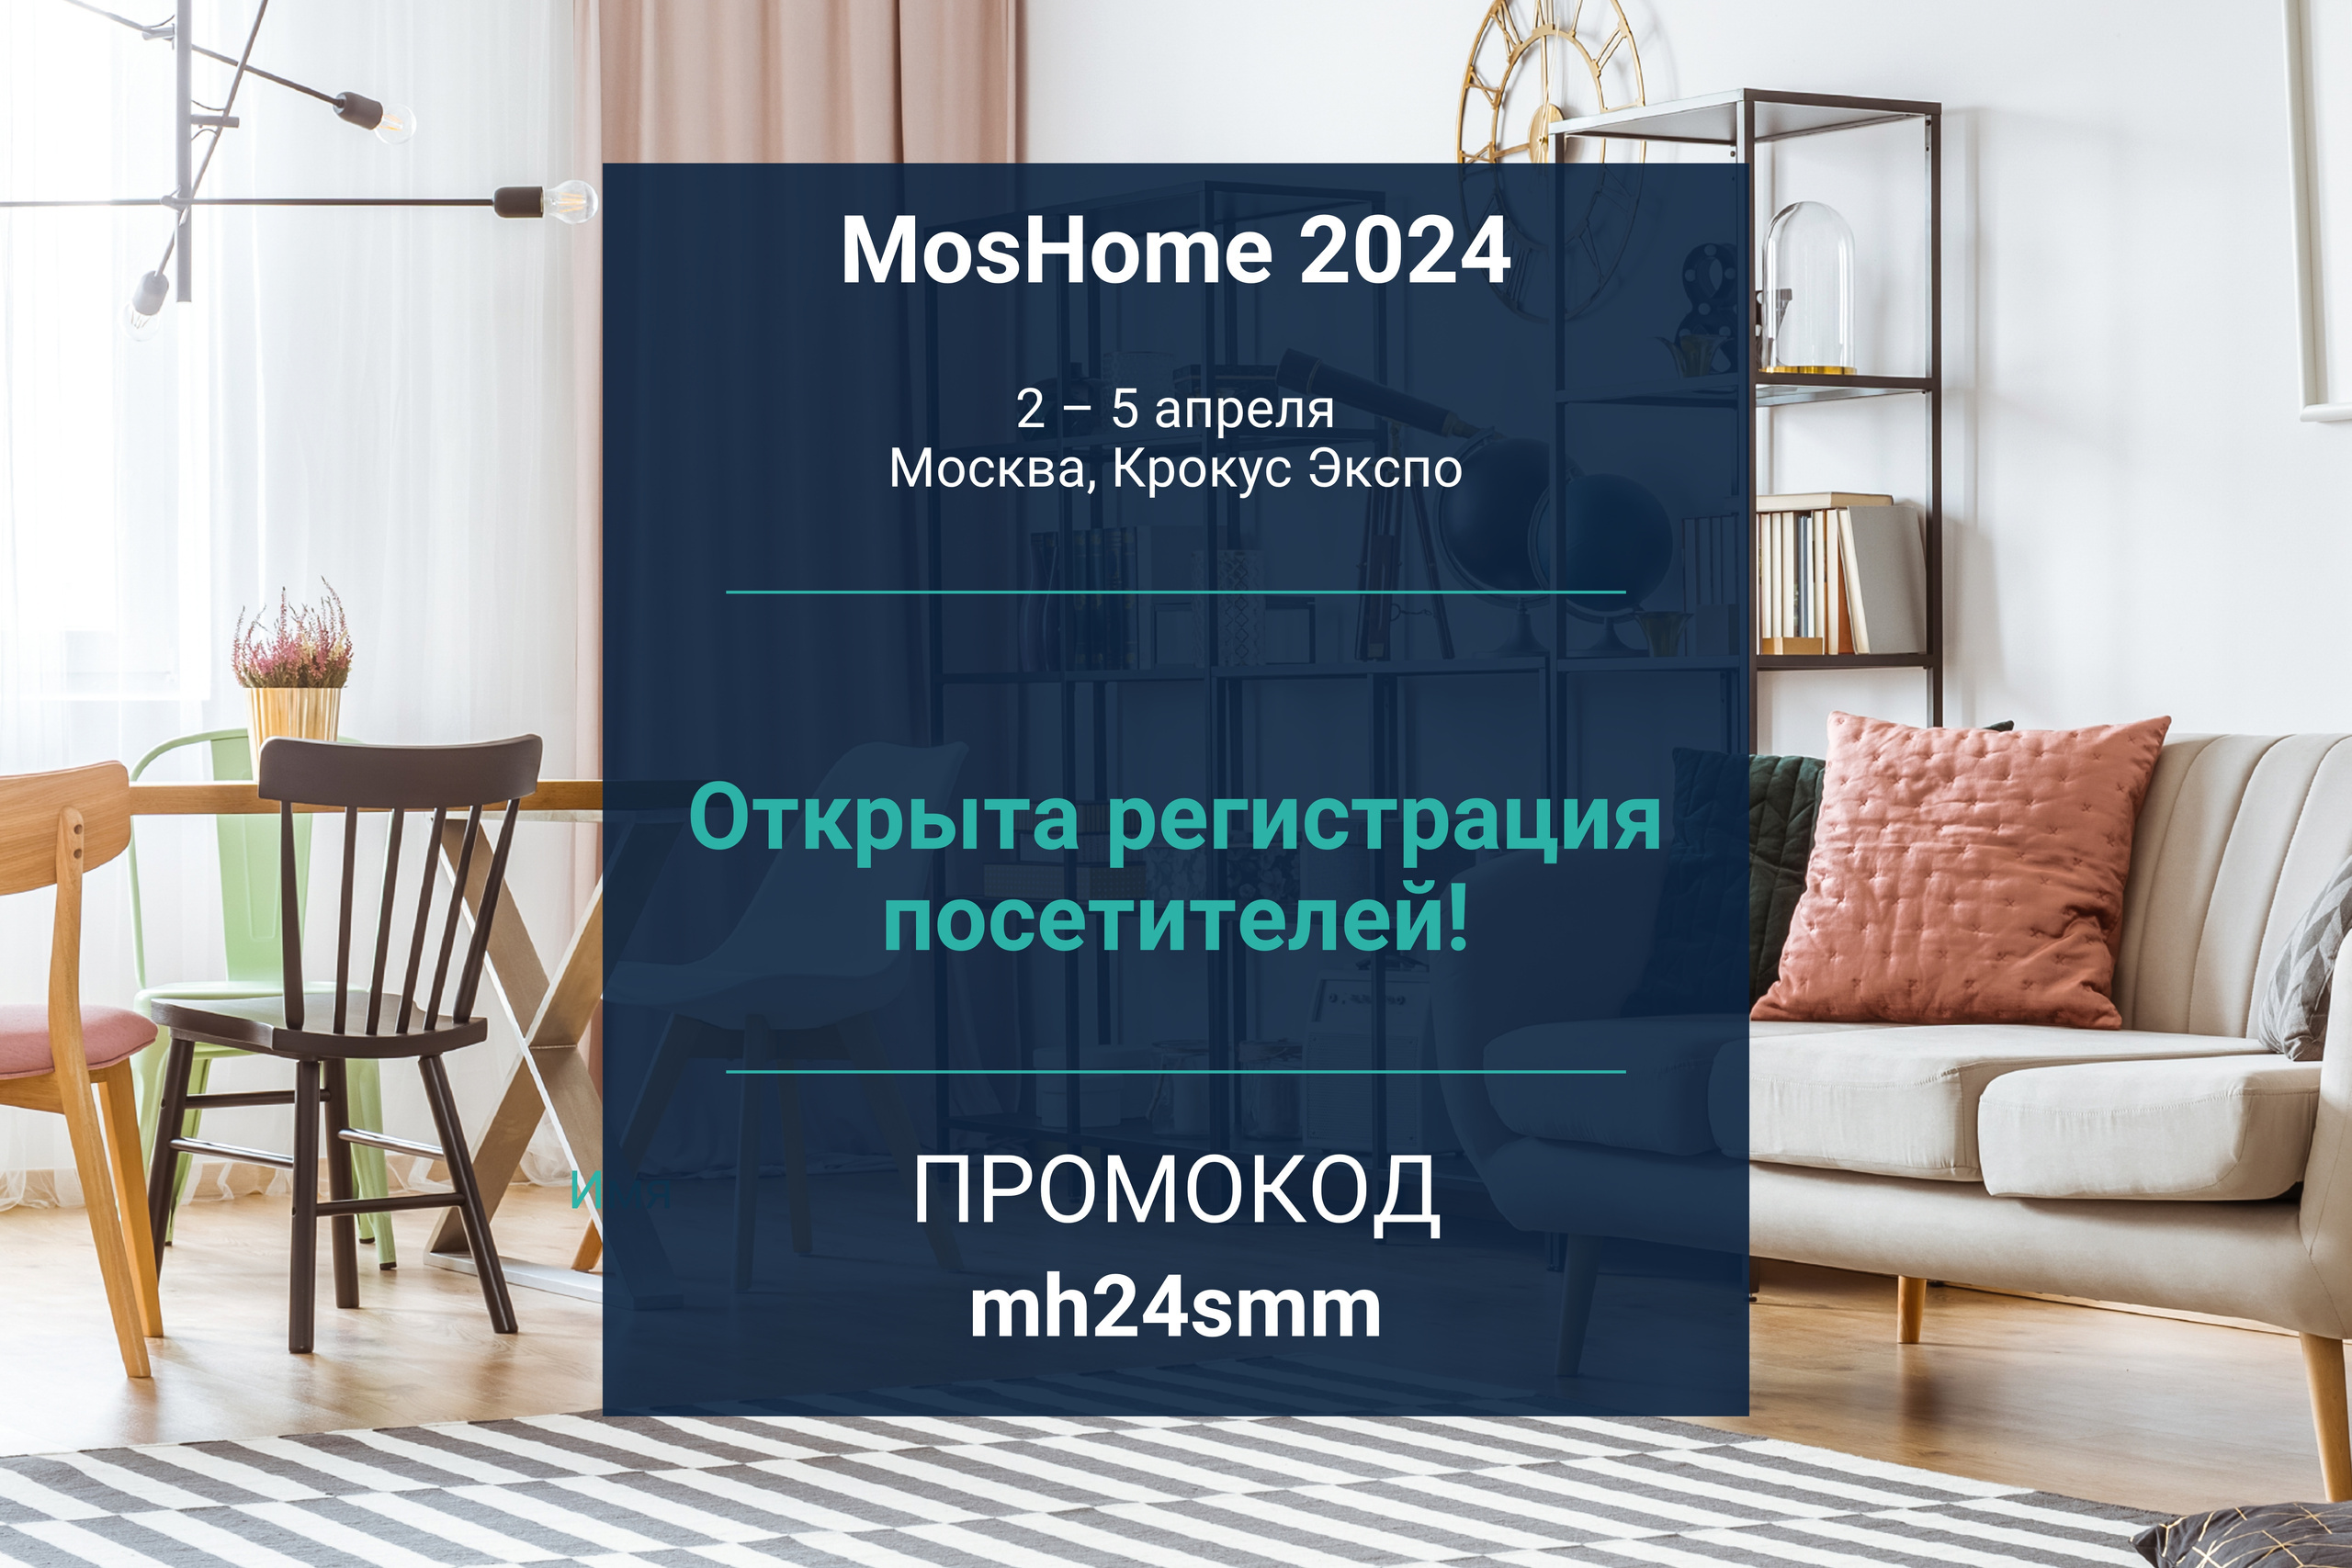 Exhibition Preview: MosHome in Moscow,Russia on April 2nd - 5th